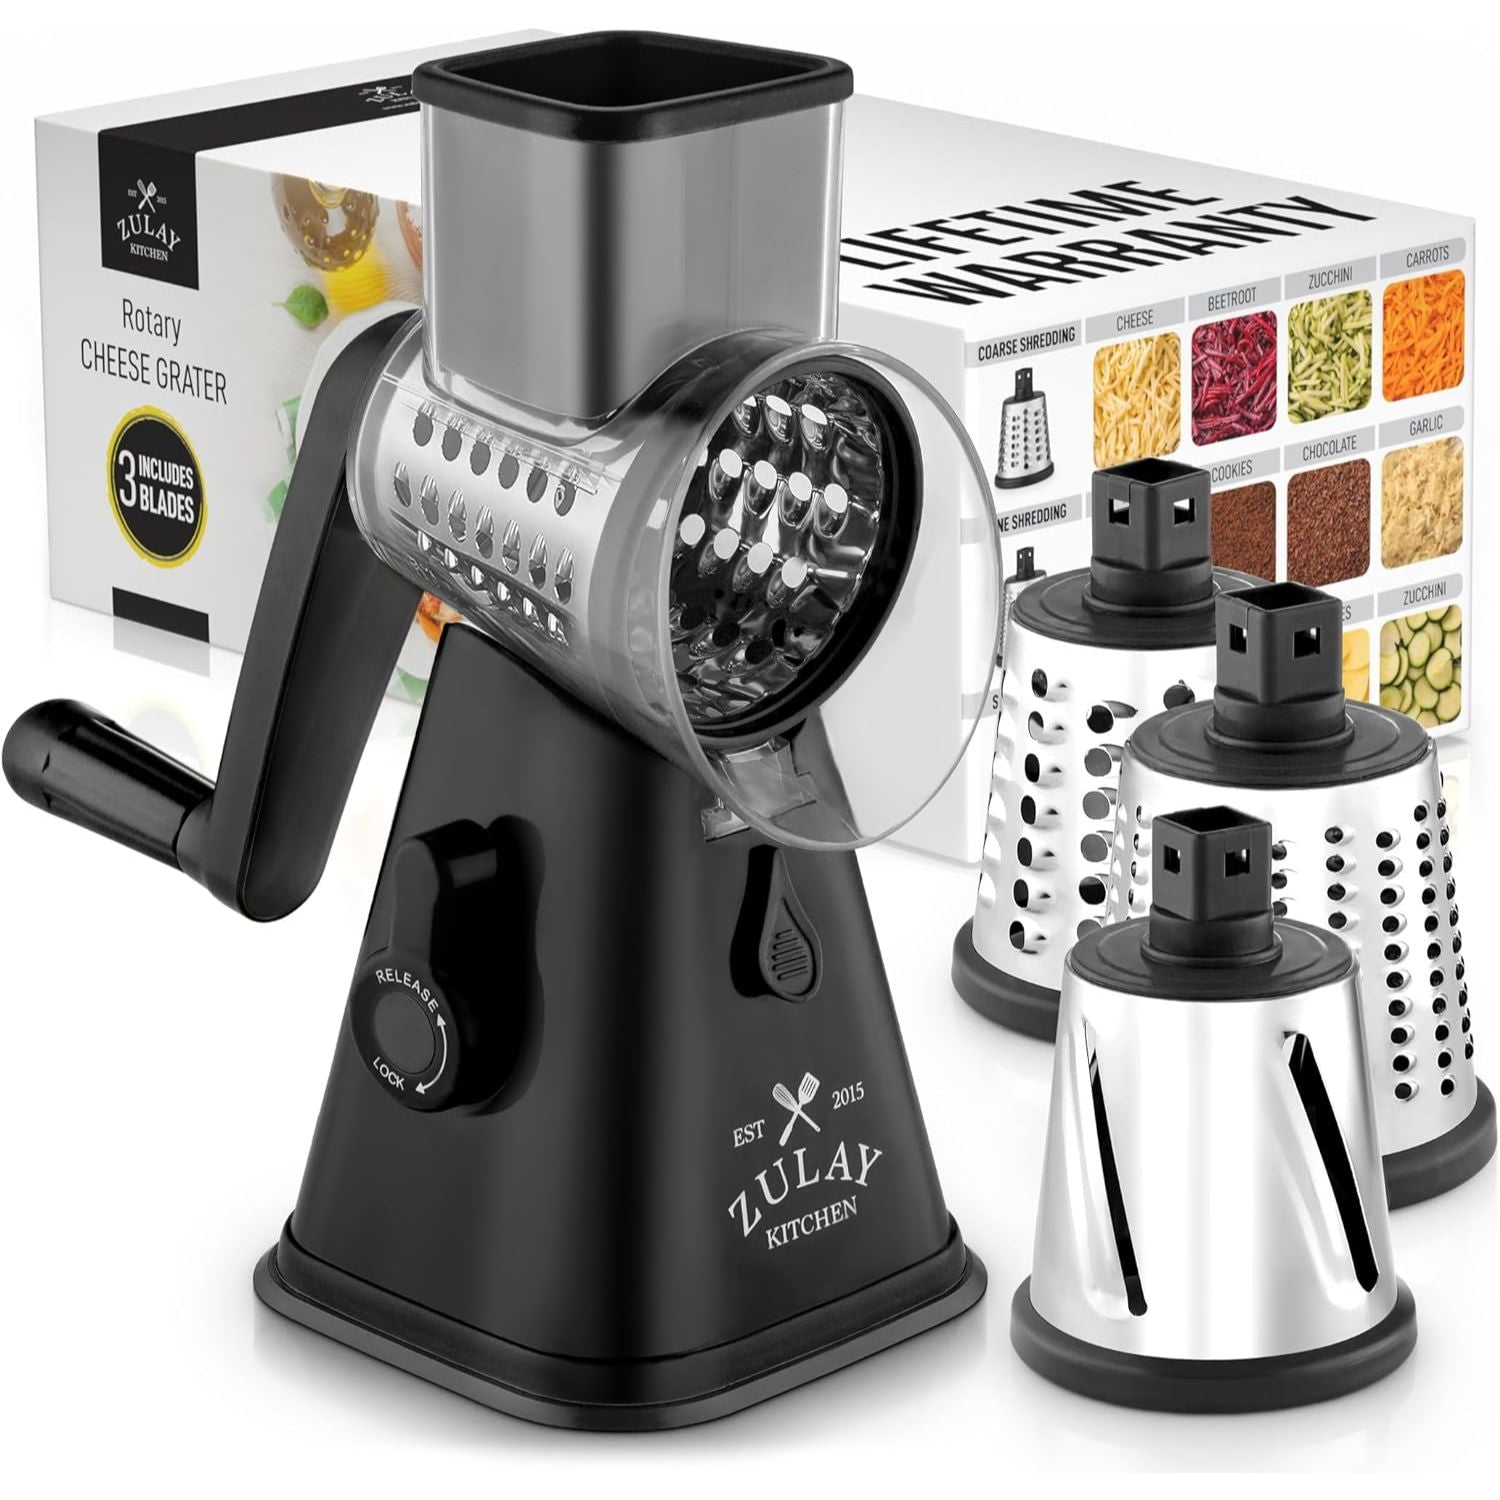  X Home Rotary Cheese Grater, Manual Cheese Grater with